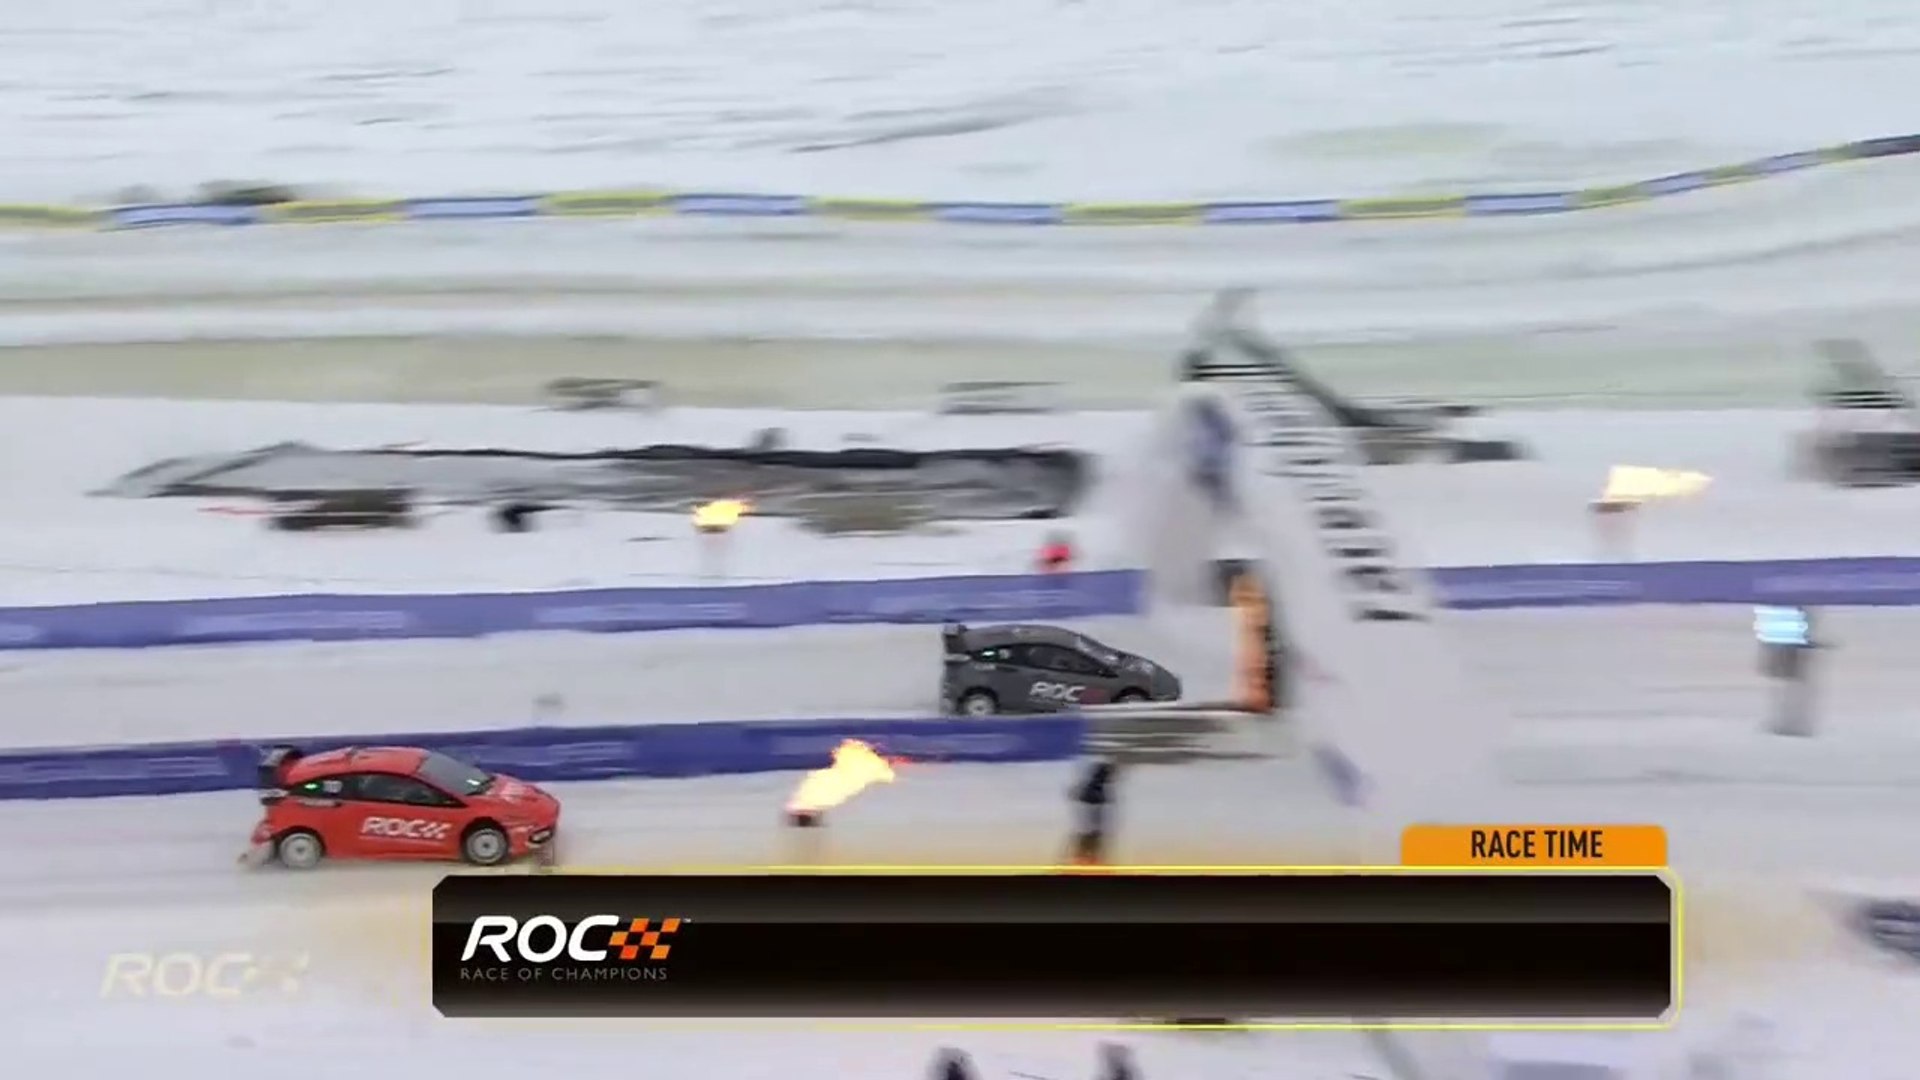 Race Of Champions 2022 Sweden Champions Cup 1/8 Final Loeb vs Solberg -  Vidéo Dailymotion